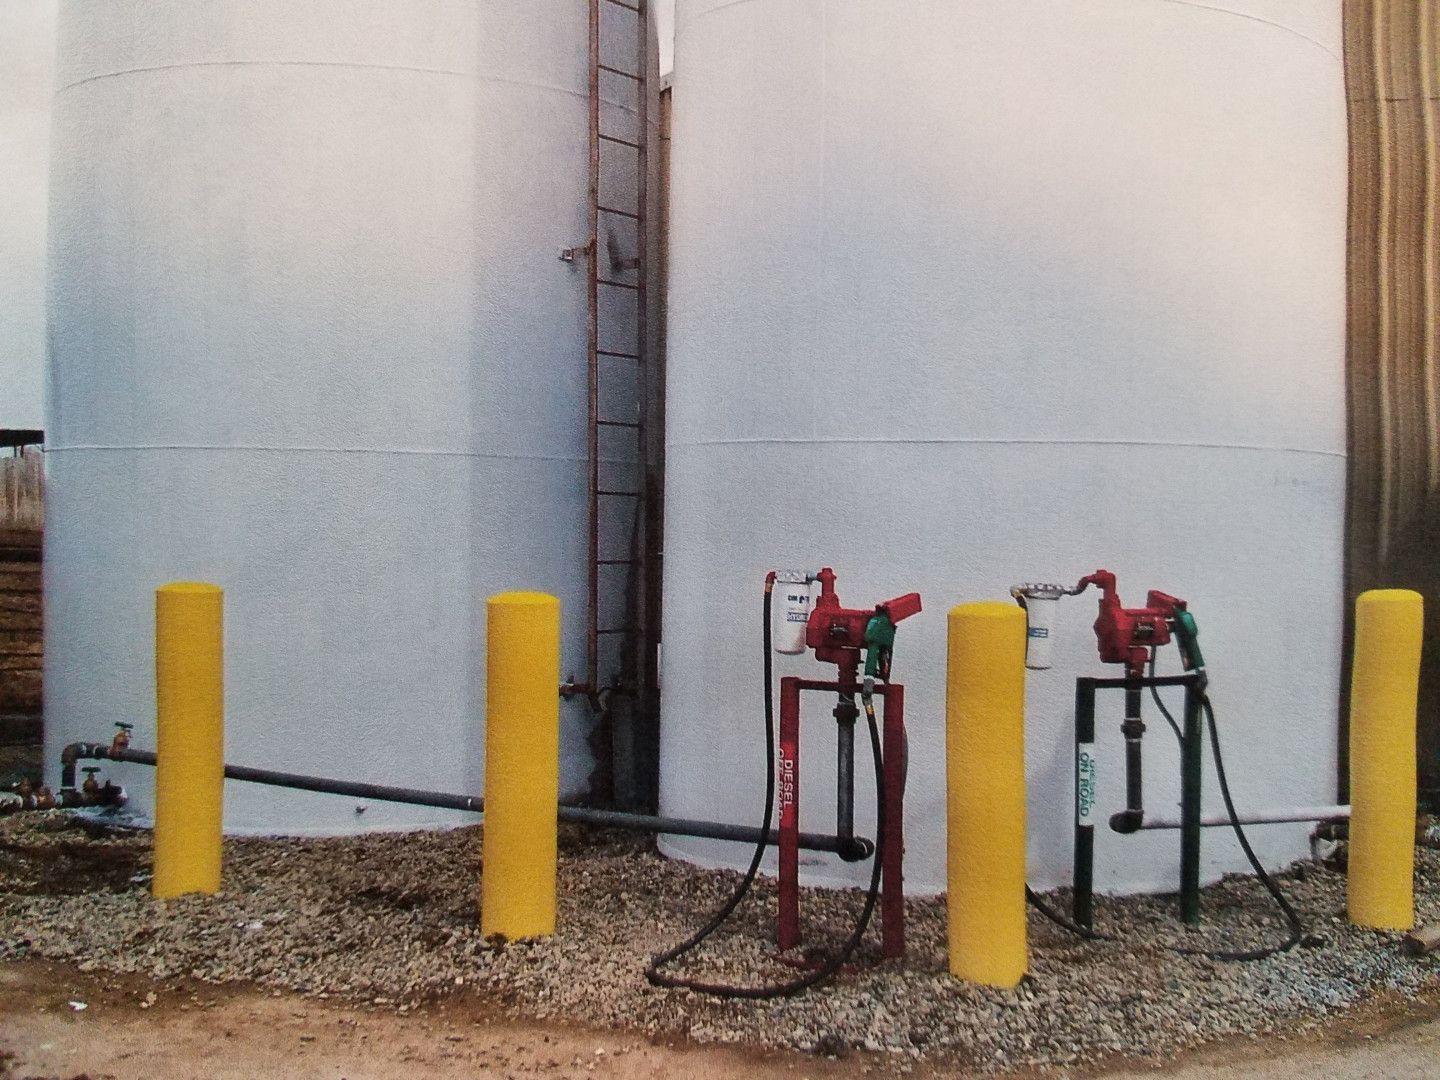 A row of yellow poles in front of a white tank